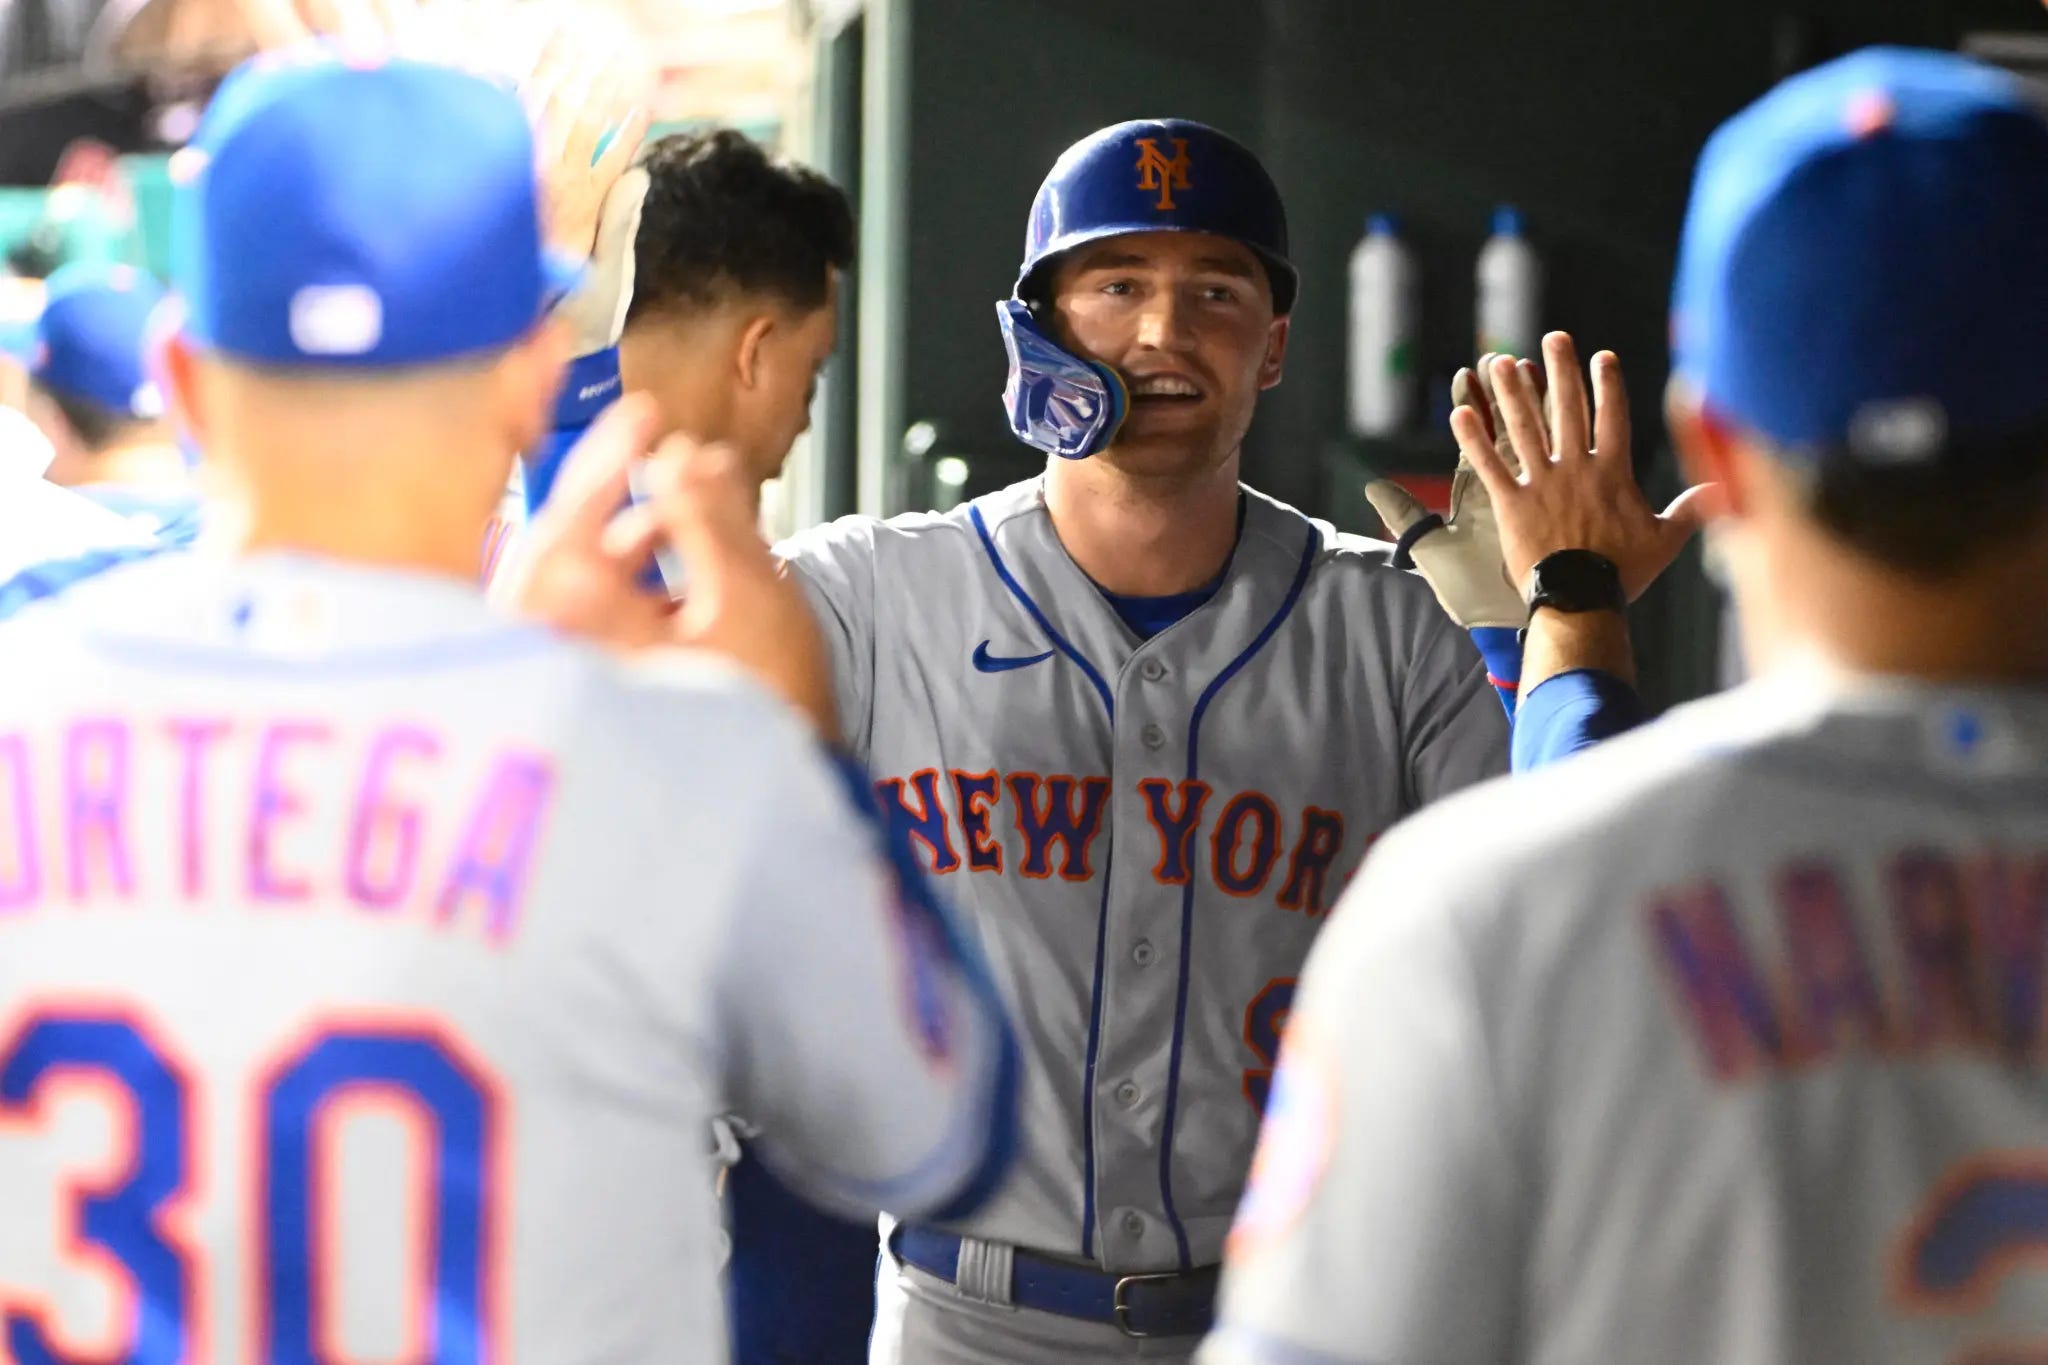 The Mets are more fun when the rookies come to play